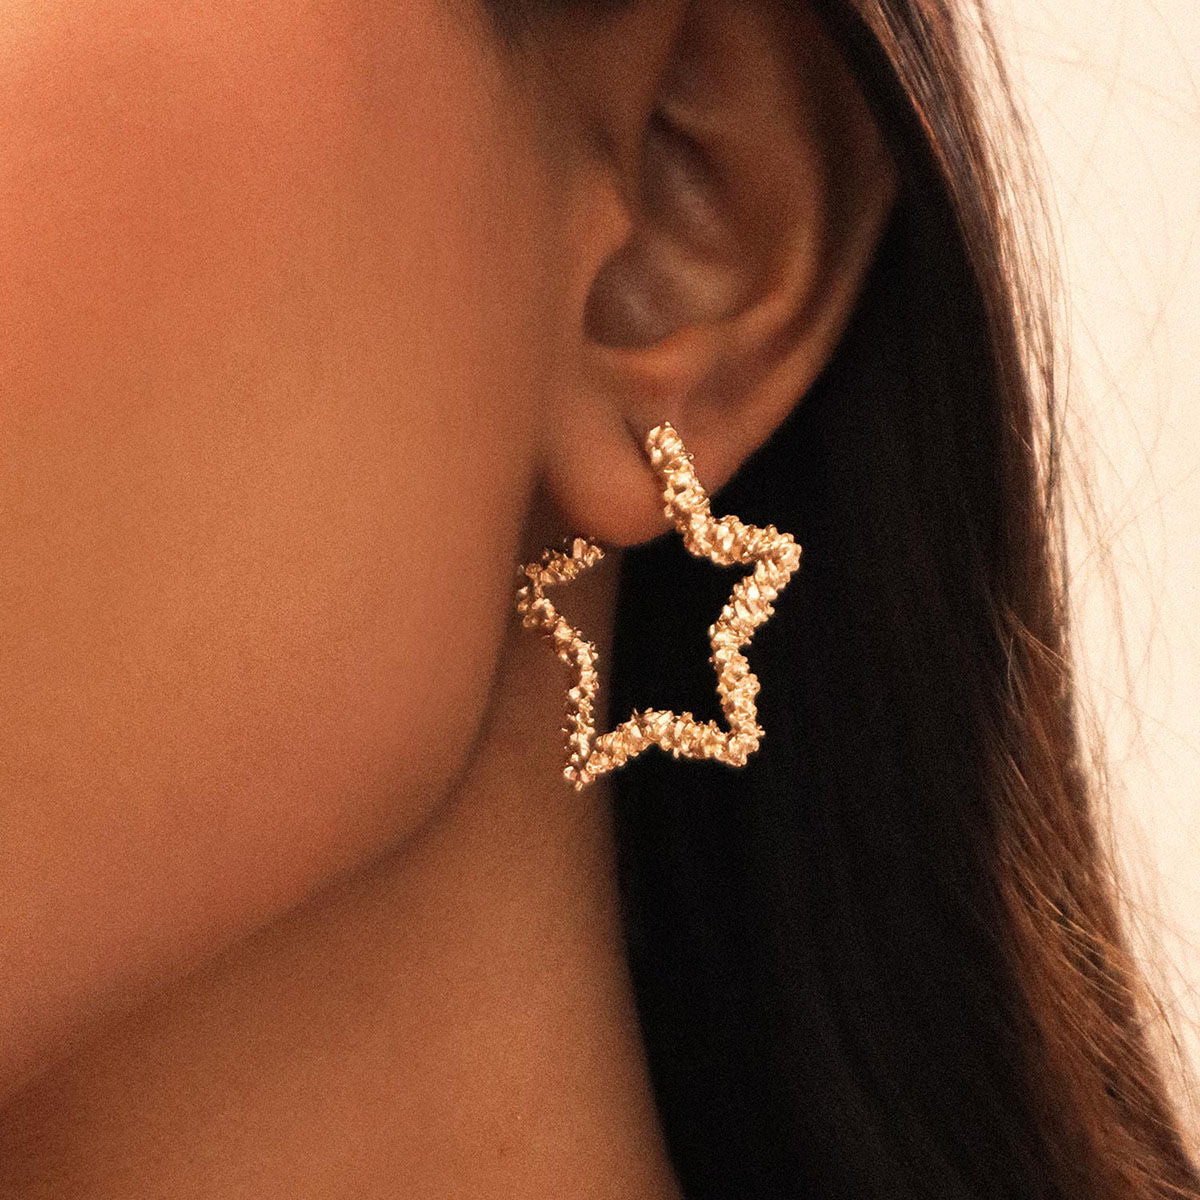 GUIDING STAR HOOPS (18K GOLD PLATED) – KIRSTIN ASH (New Zealand)